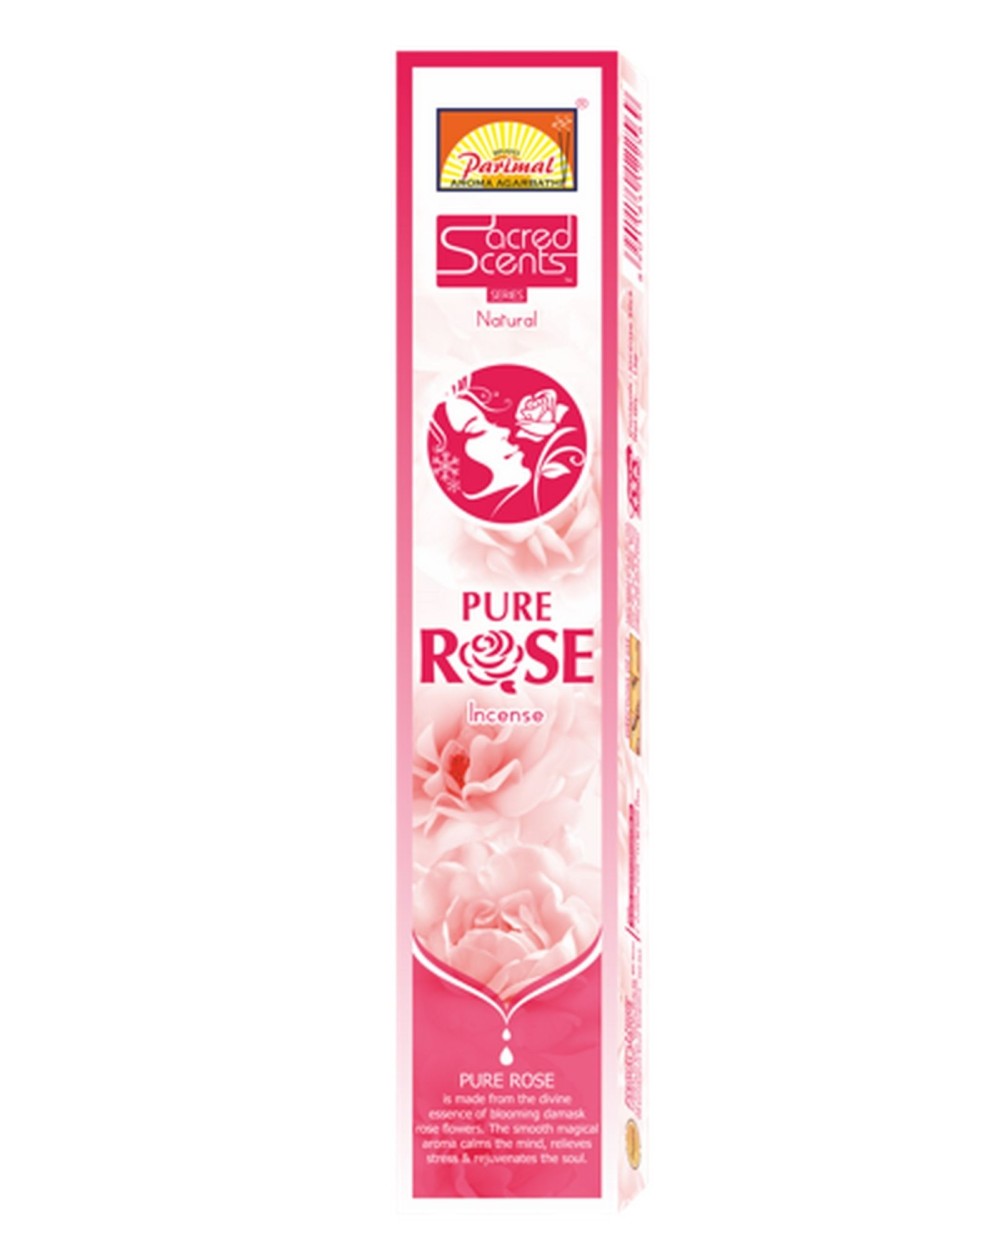 Natural Parimal Incense with Pure Rose Scent